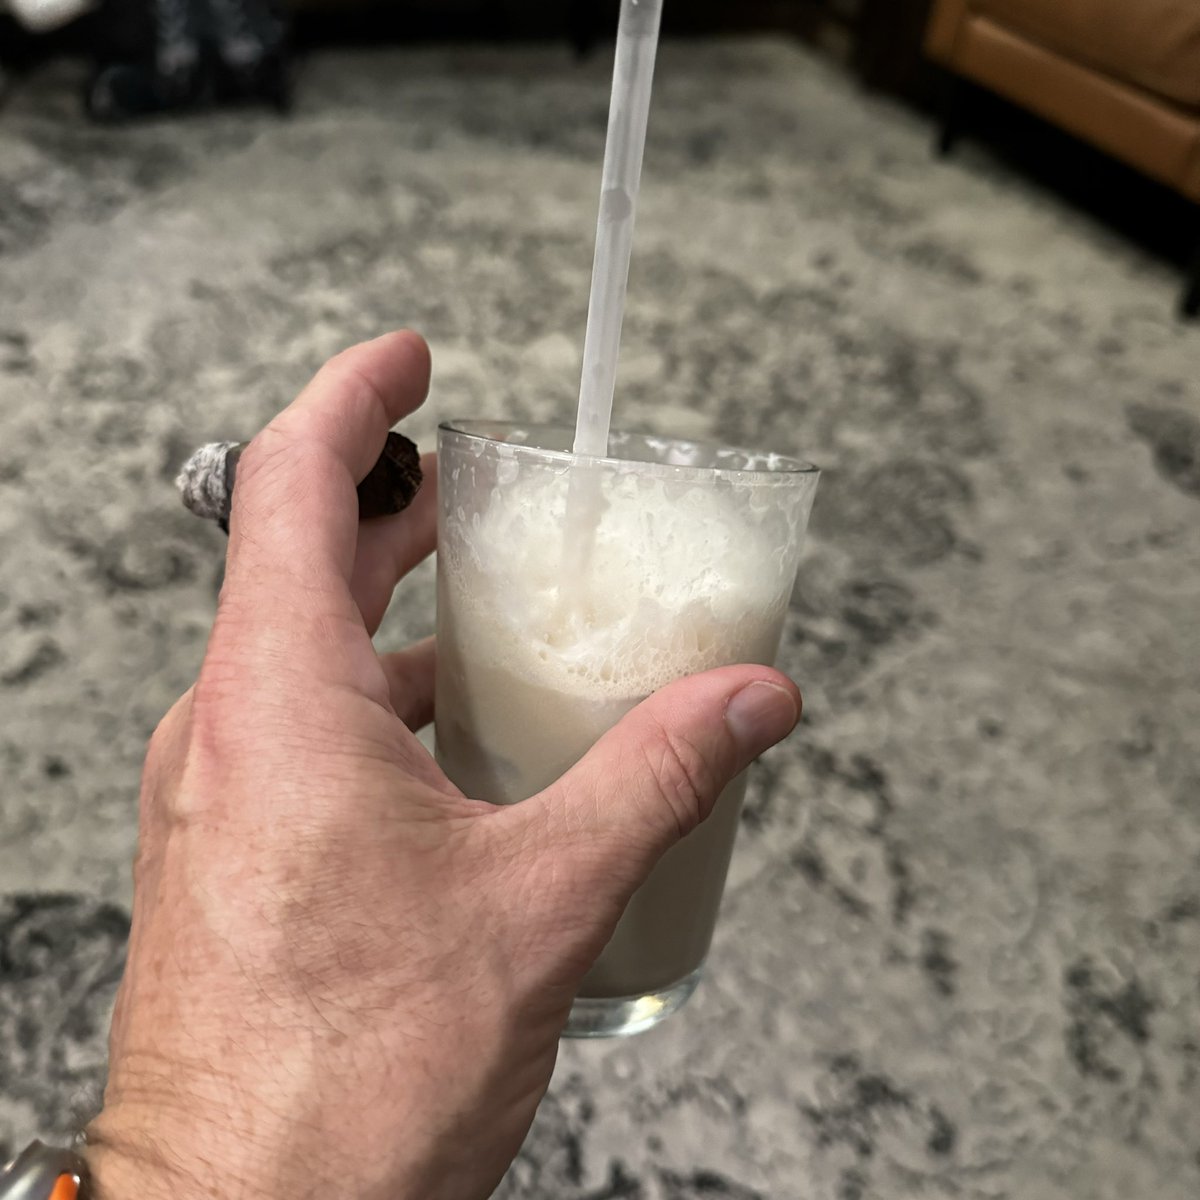 Adult Root Beer Float Irish Cream, Kahlúa, heavy whipping cream (all shaken together with ice), and @AWRootBeer Zero Sugar. Tastes just like a root beer float. #RBCC